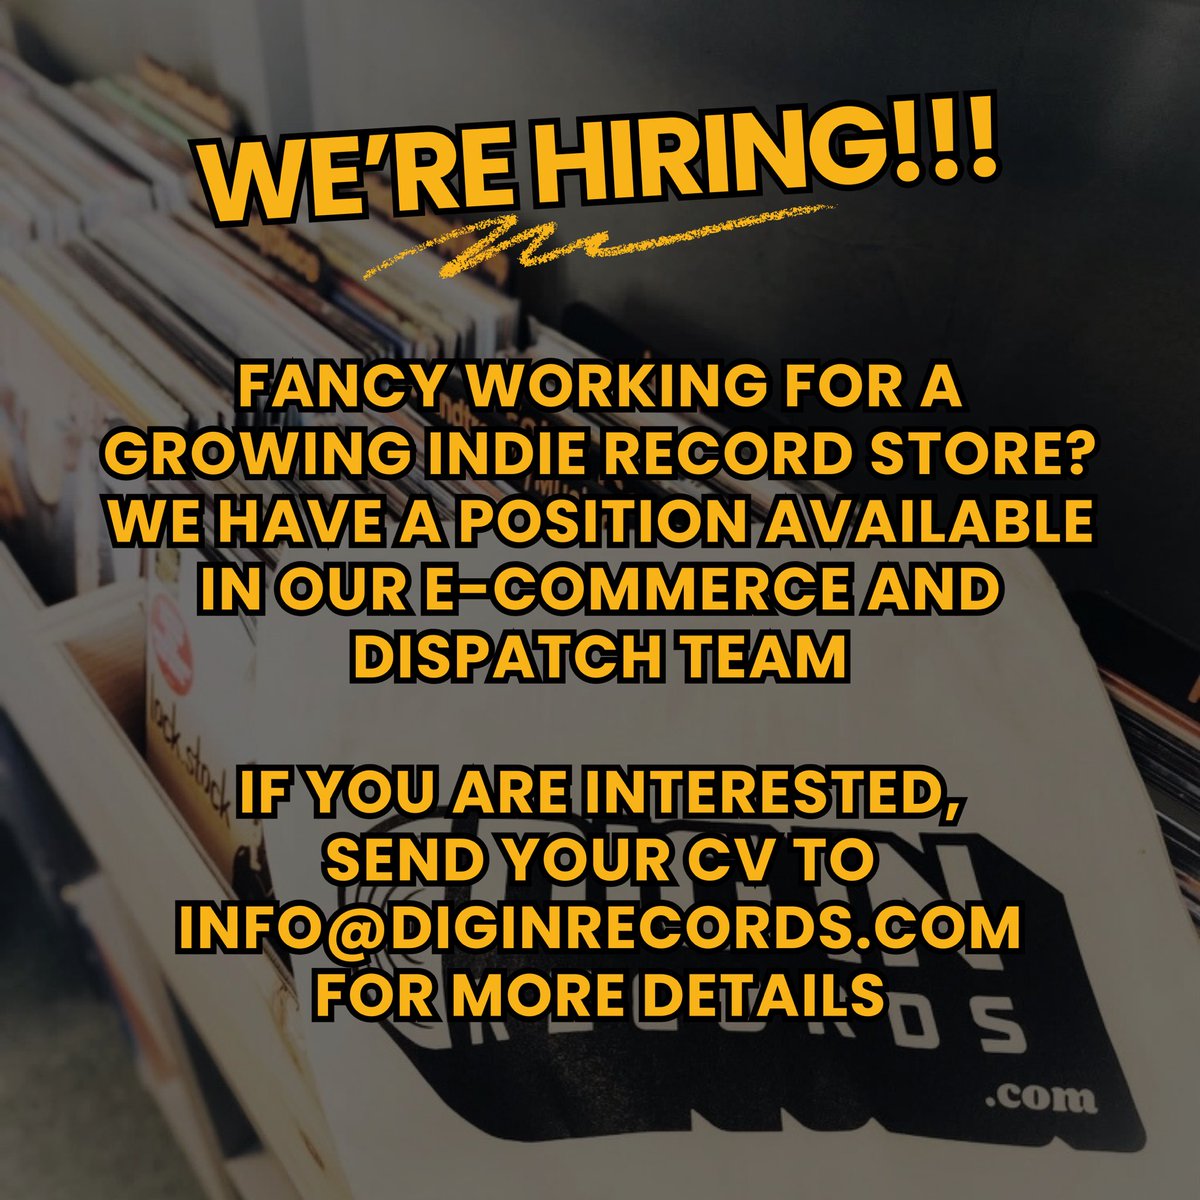 New Year - New Job?!

A position has arisen in our e-commerce and dispatch team. Feel like you have what it takes? Shoot us your CV to info@diginrecords.com for more info! #newjob #newyear #music #jobsinmusic #vinyl #woking #welovewoking #ecommerce #diginrecords #jobsearch